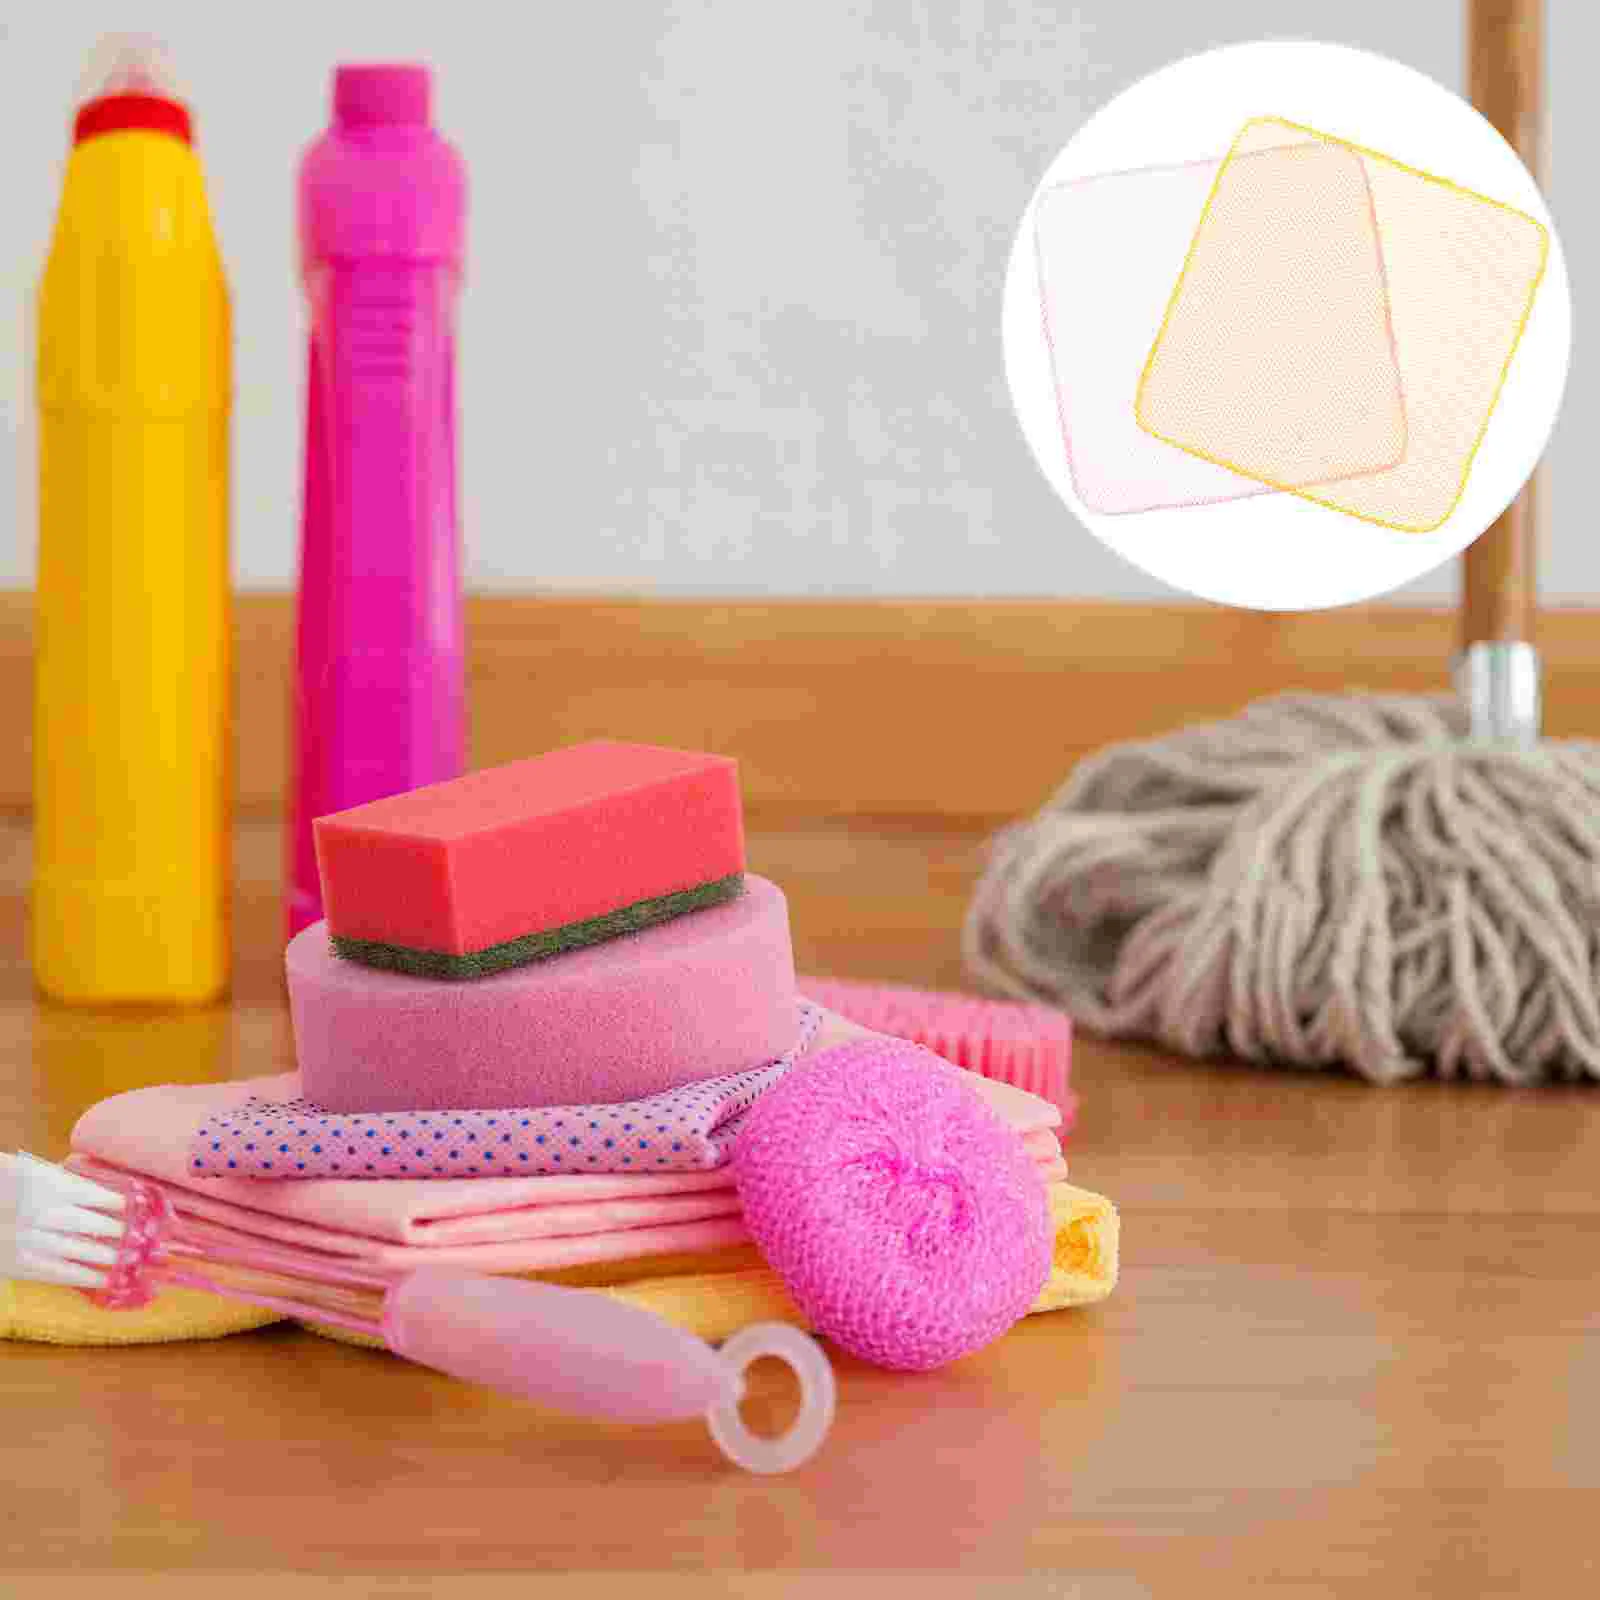 

Dish Kitchen Cloth Washing Cloths Net Towel Cleaning Wash Scrubber Towels Dishes Hand Rags Mesh Quick Dishwashing Rag Sponges